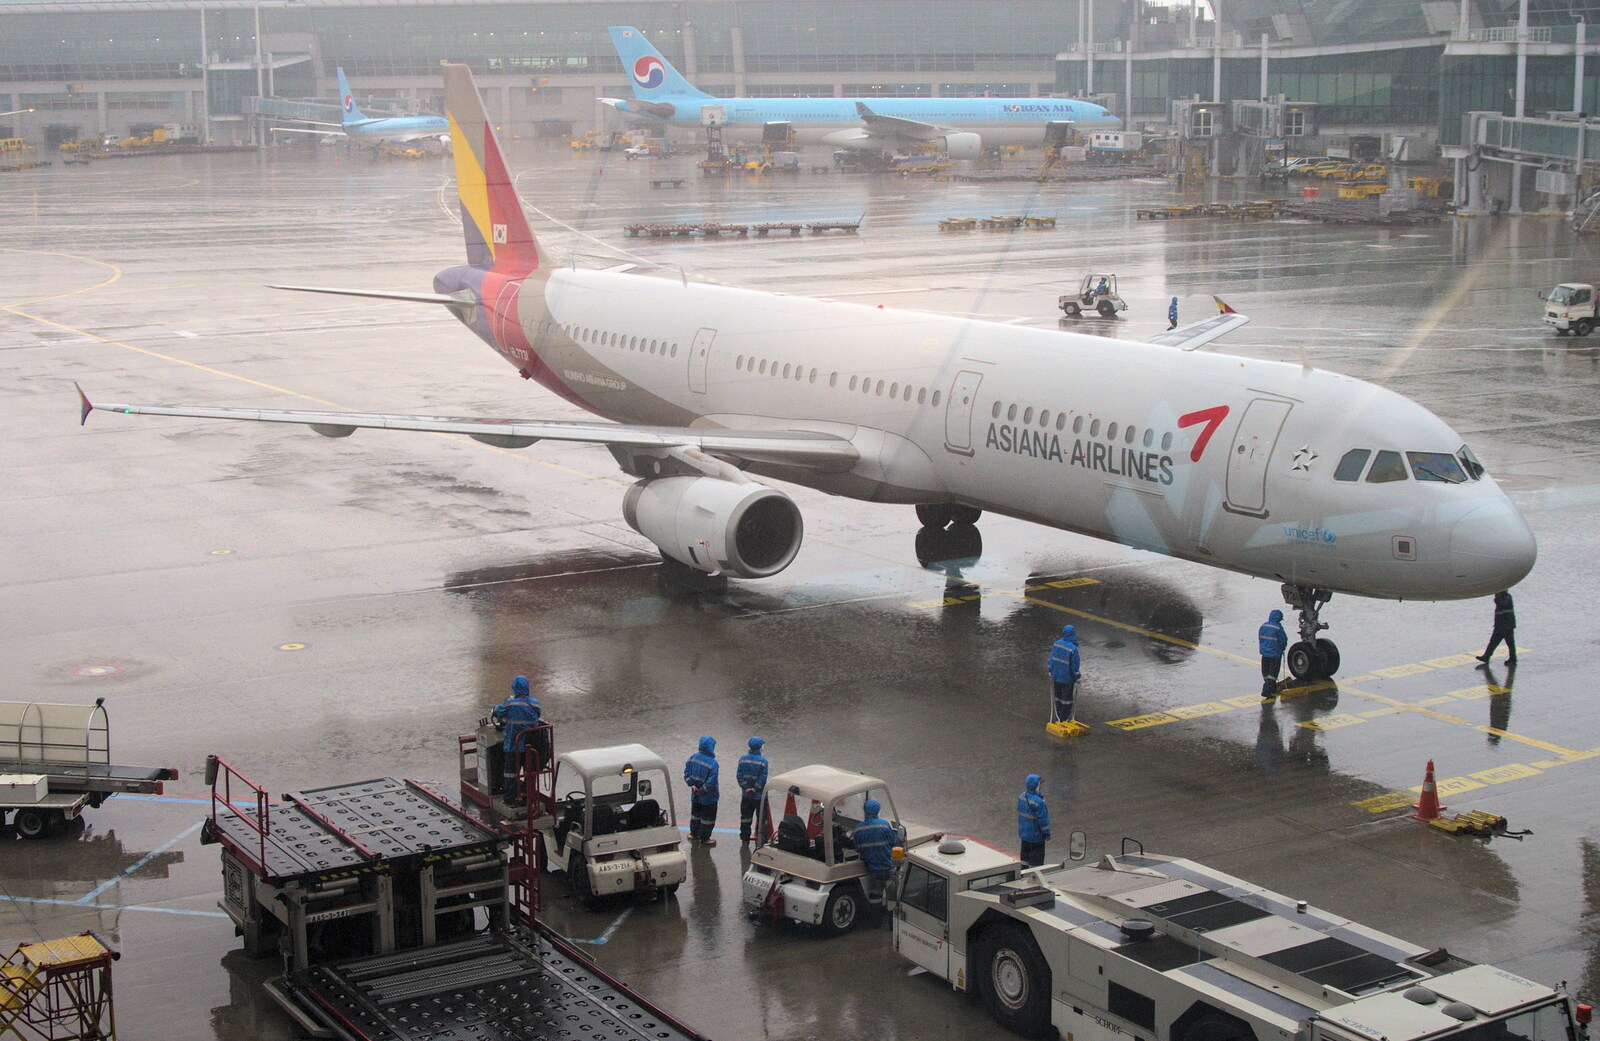 An Asiana Airlines comes on to the stand from Seomun Market, Daegu, South Korea - 1st July 2012